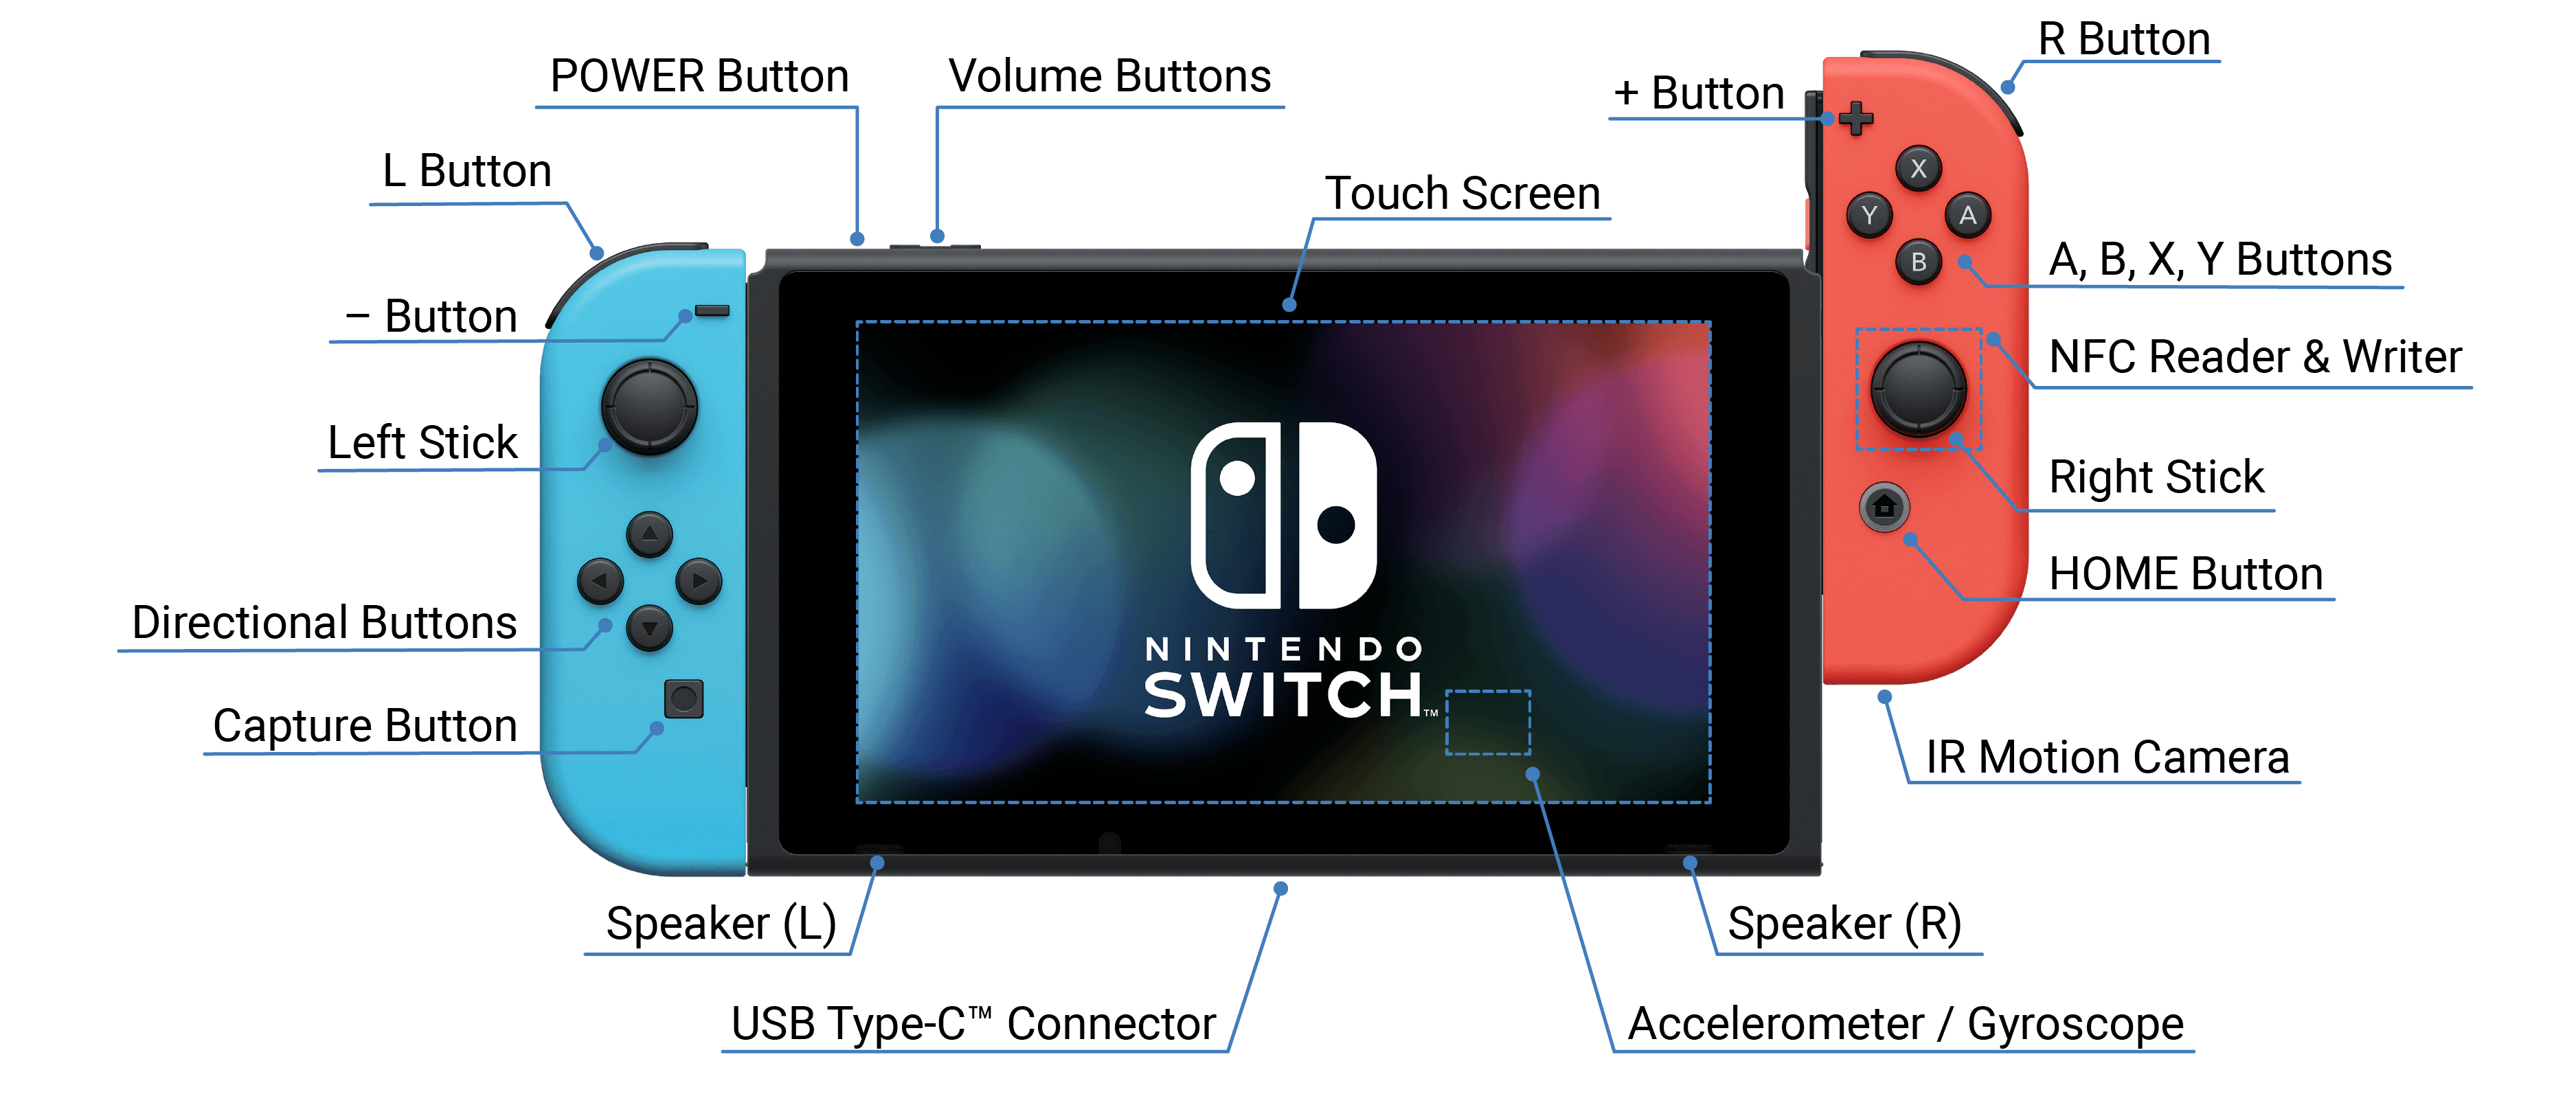 [Getting Started Guide] Nintendo Switch Diagram